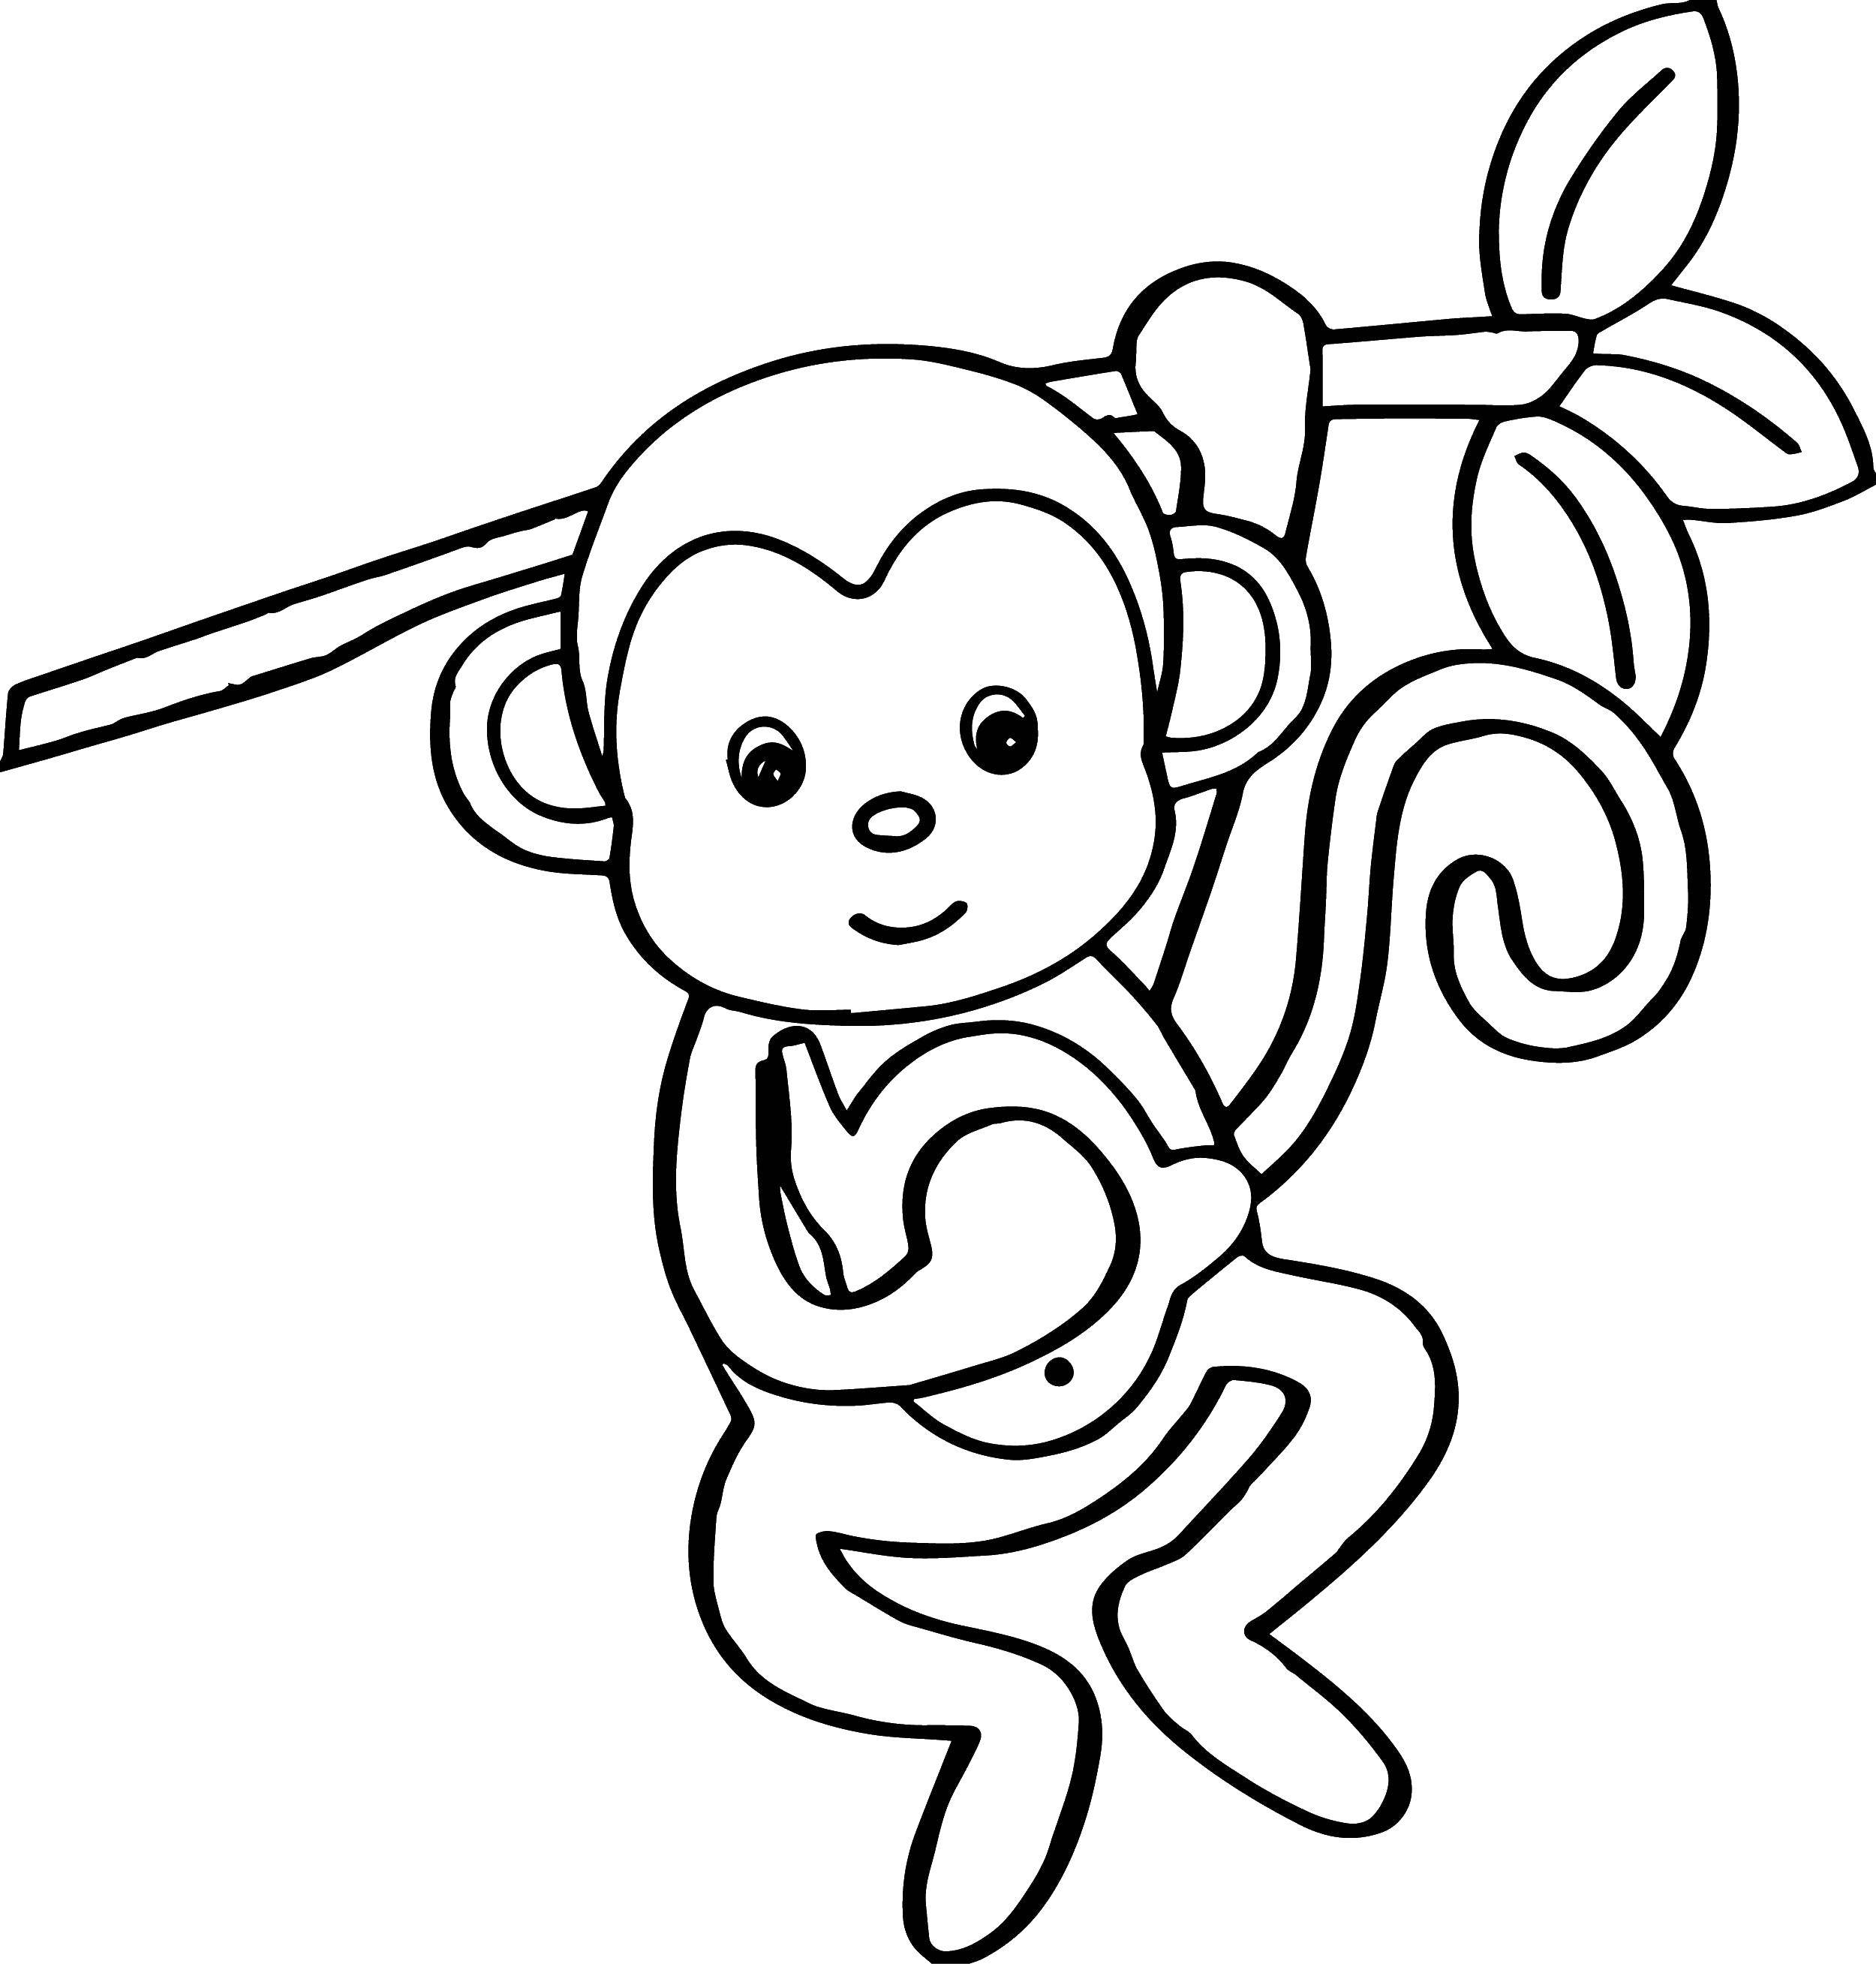 Coloring Monkey on a branch. Category Animals. Tags:  animals, monkeys, macaques.